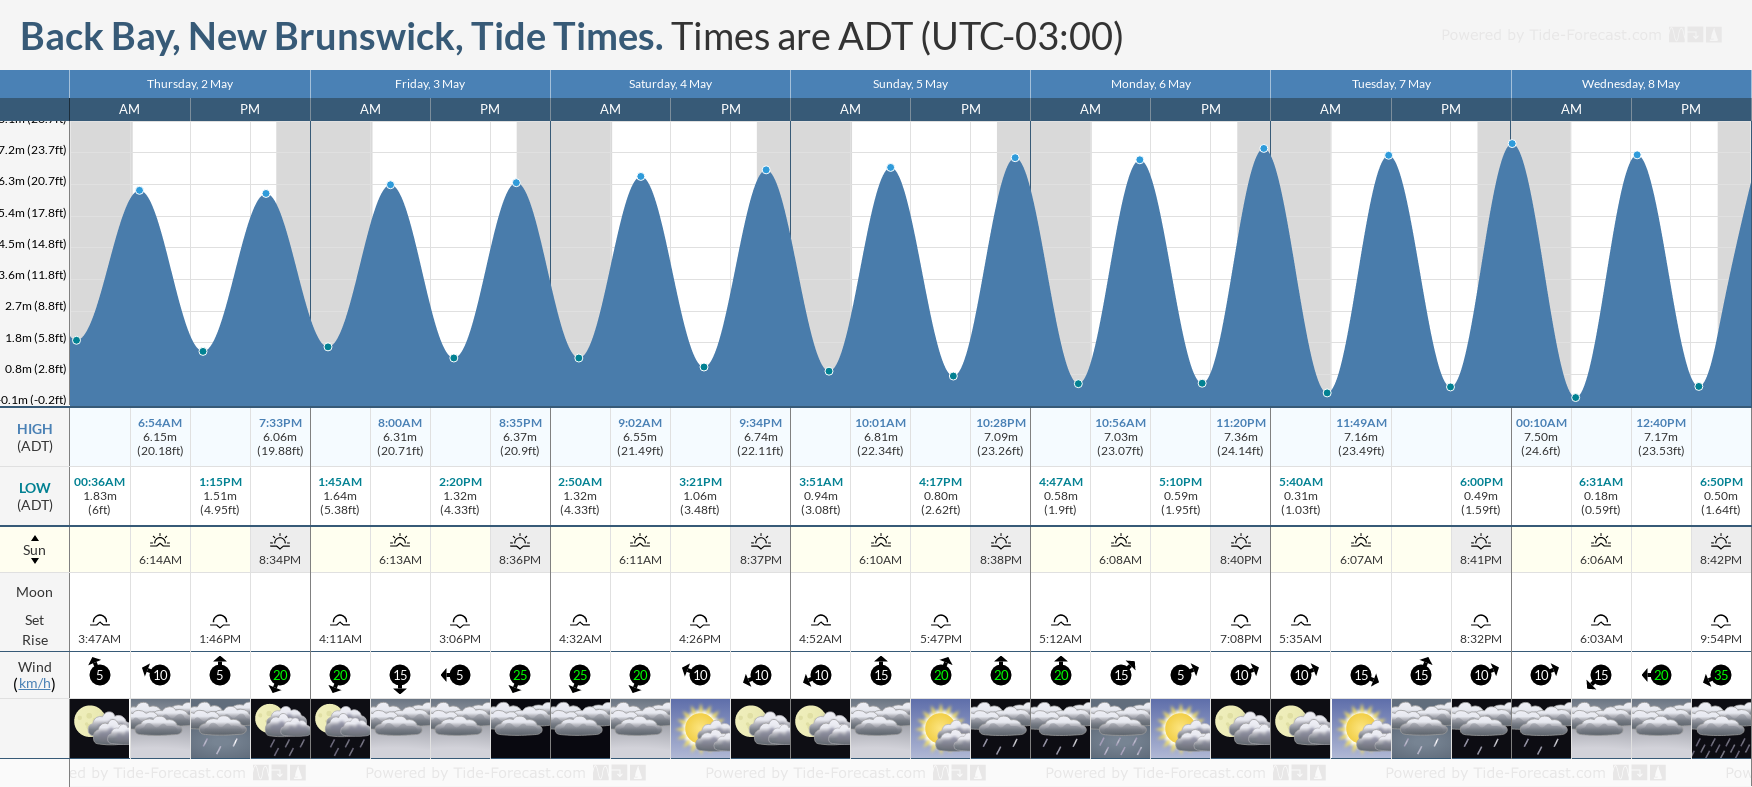 Back Bay, New Brunswick Tide Chart including high and low tide tide times for the next 7 days